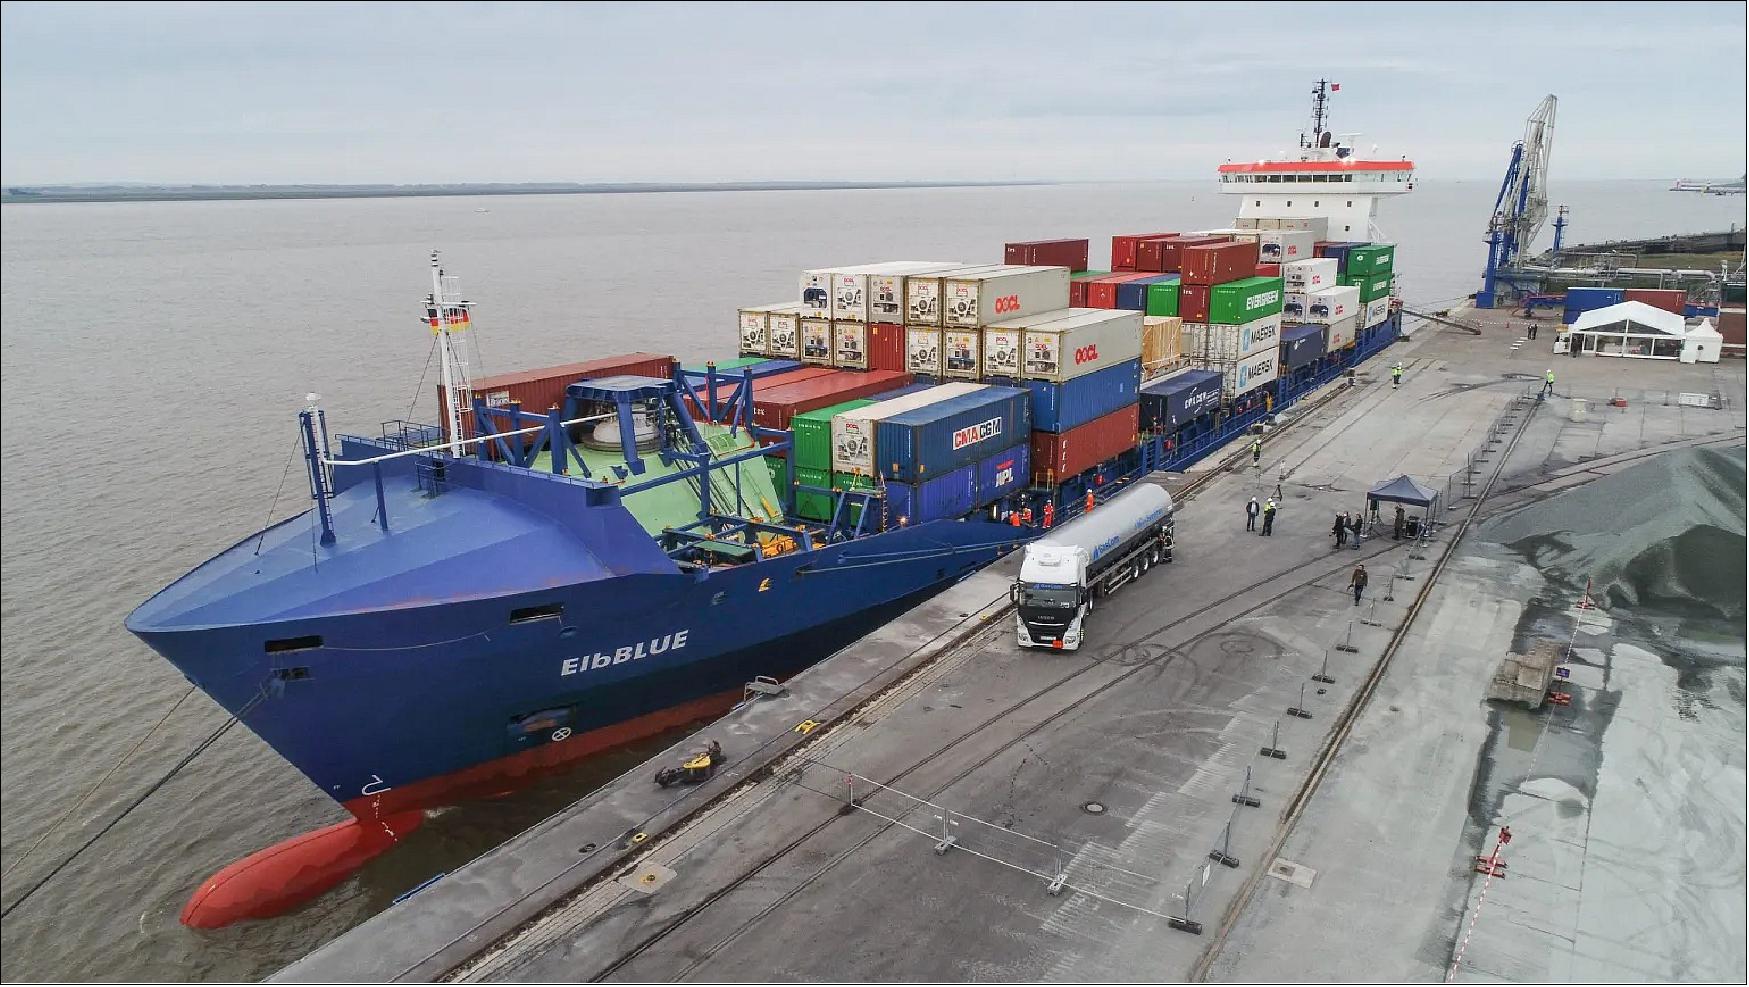 Figure 55: The containership, ElbBLUE has bunkered green SNG (synthetic natural gas) at the Elbe port in Brunsbüttel, Germany. MAN Energy Solutions has reported that the 1,036-TEU container ship, ElbBLUE – the former Wes Amelie – has reduced its greenhouse gas (GHG) emissions by 27 percent by operating on a blend of climate-neutral, synthetic natural gas (SNG) and conventional liquefied natural gas (LNG), compared to LNG alone (image credit: Elbdeich, Unifeeder)